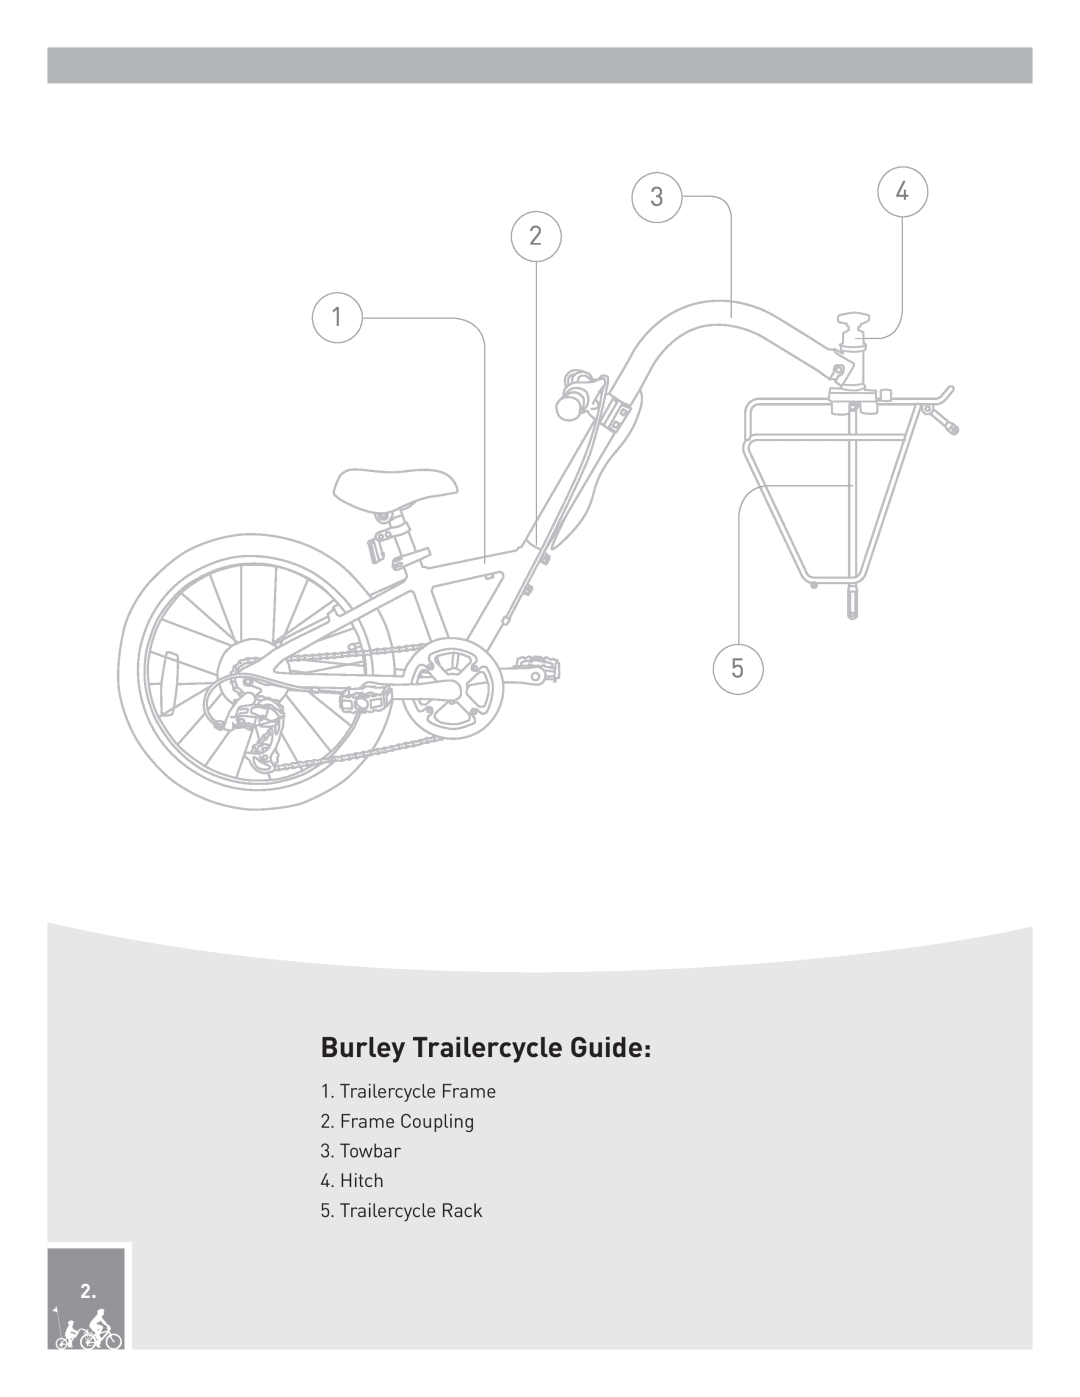 Burley Piccolo Burley Trailercycle Guide, Trailercycle Frame 2. Frame Coupling 3. Towbar 4. Hitch, Trailercycle Rack 